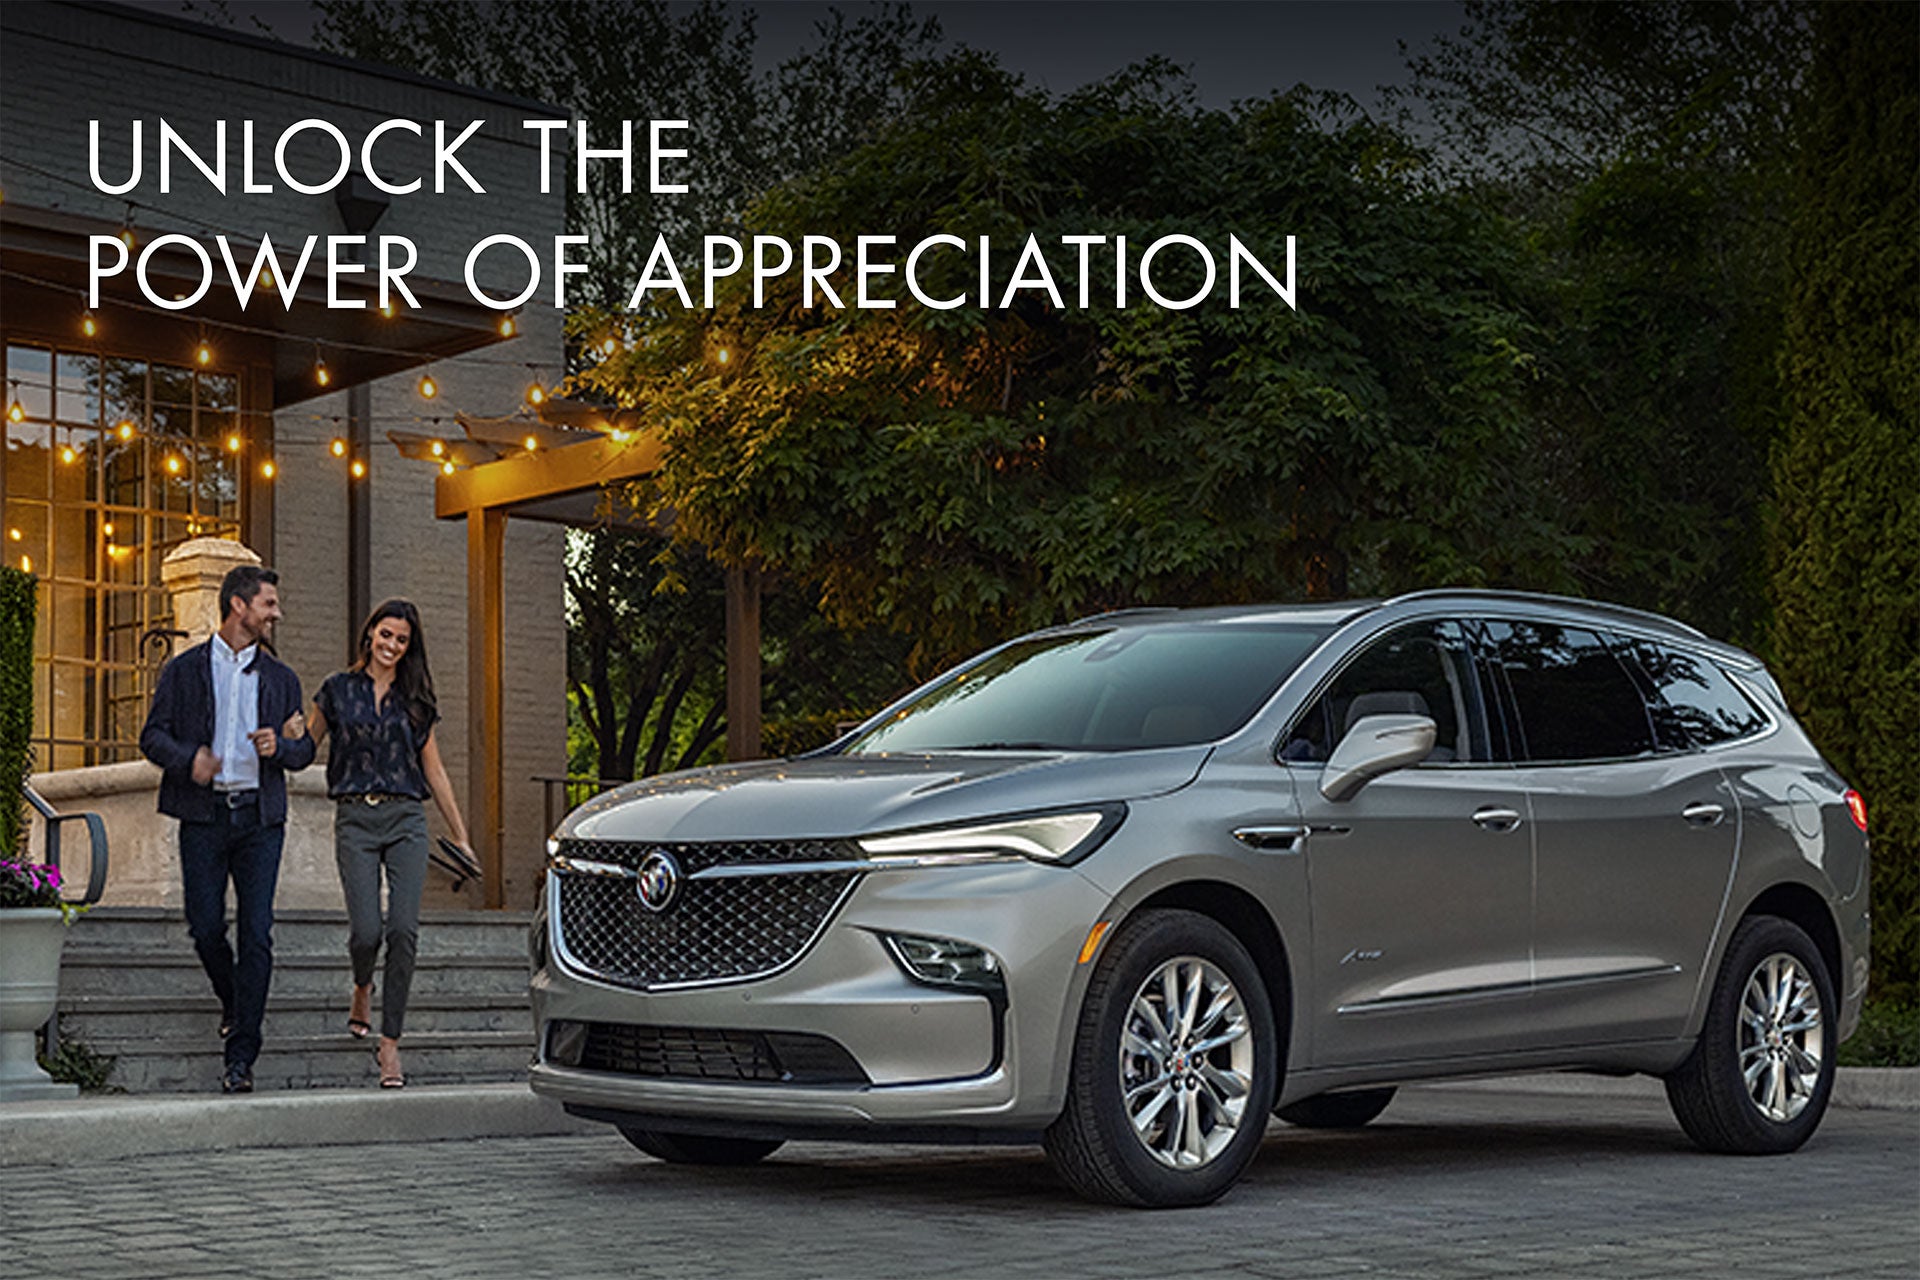 Unlock the power of appreciation | Andy Mohr Buick GMC in Fishers IN